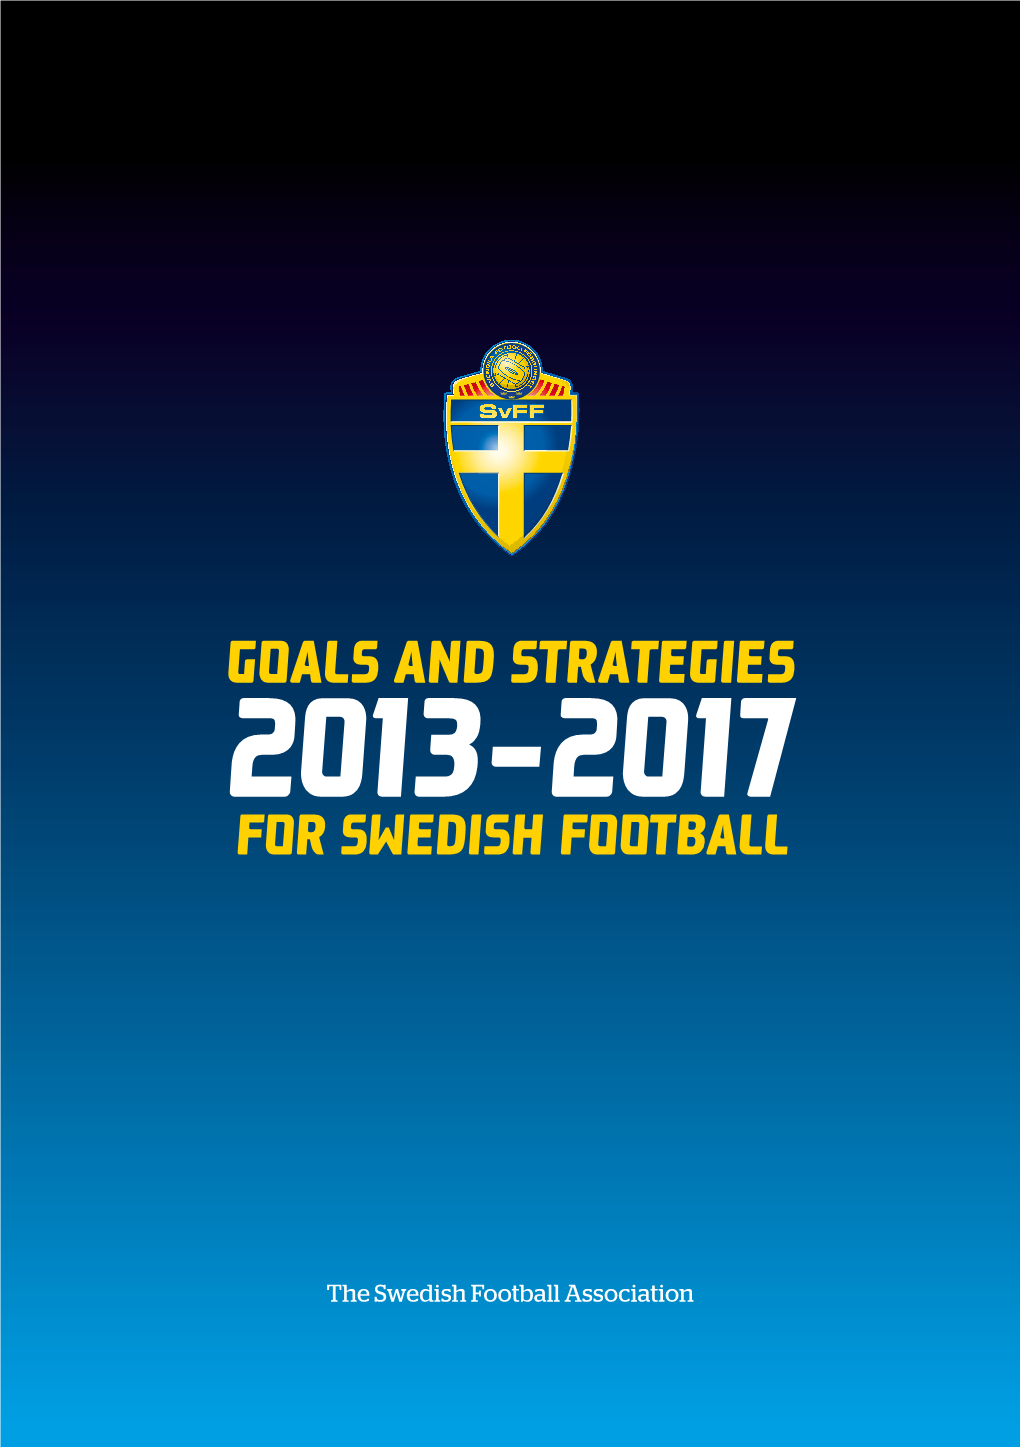 Goals and Strategies 2013-2017 for Swedish Football